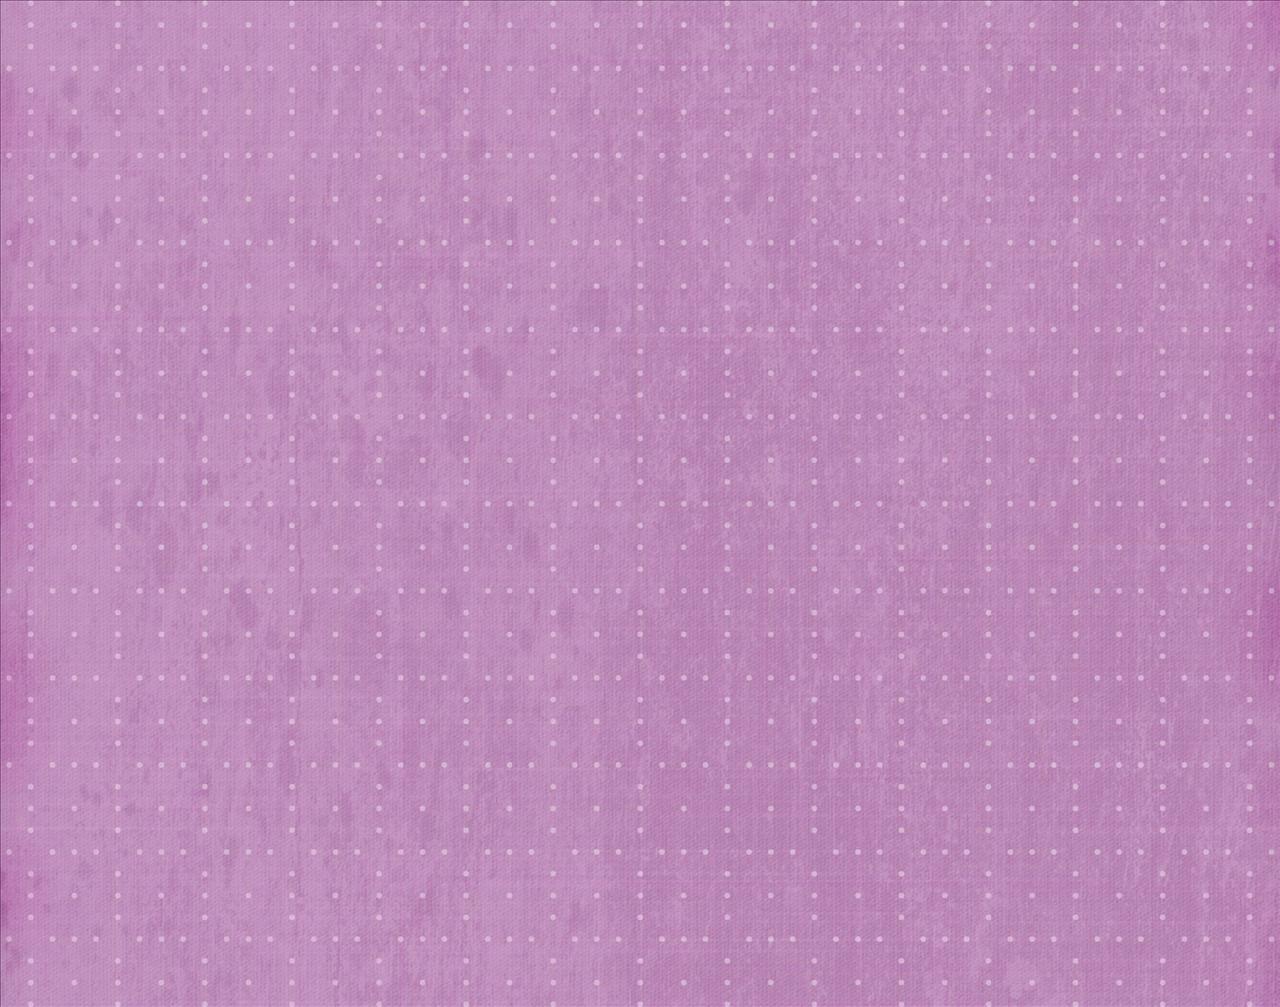 Light Purple Wallpaper Backgrounds For Powerpoint Templates Ppt Backgrounds